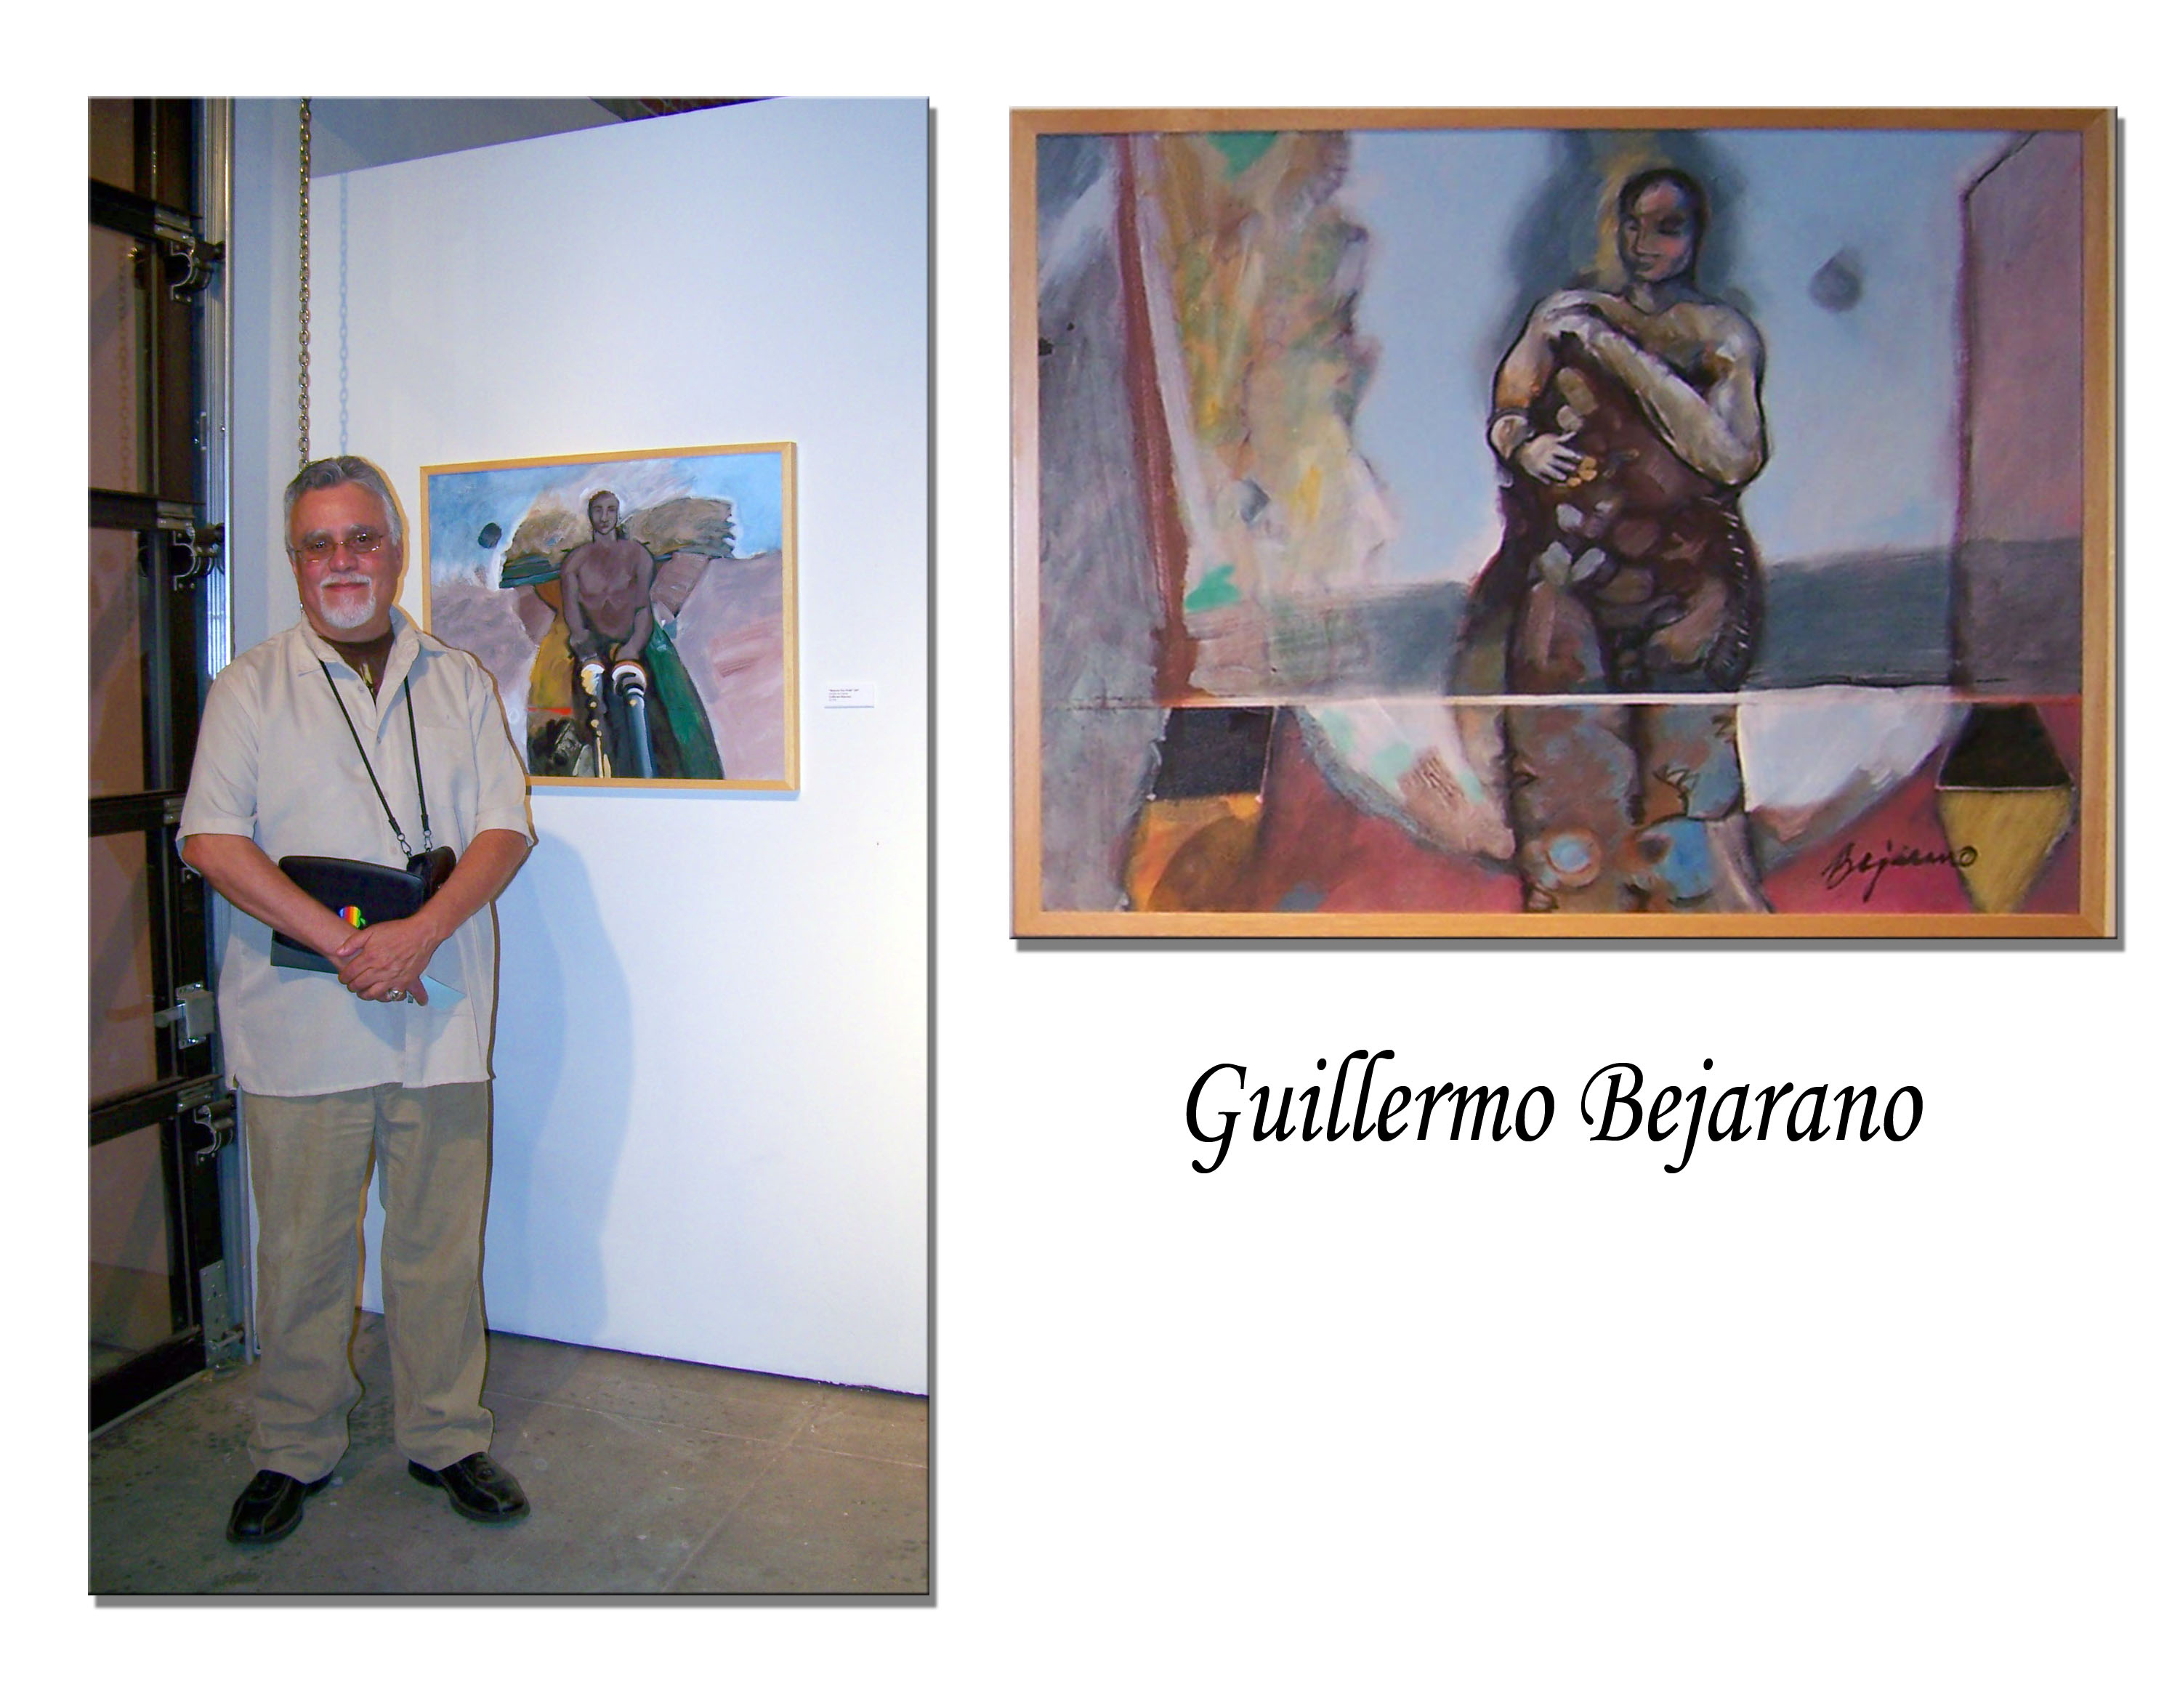 Guillermo and his painting